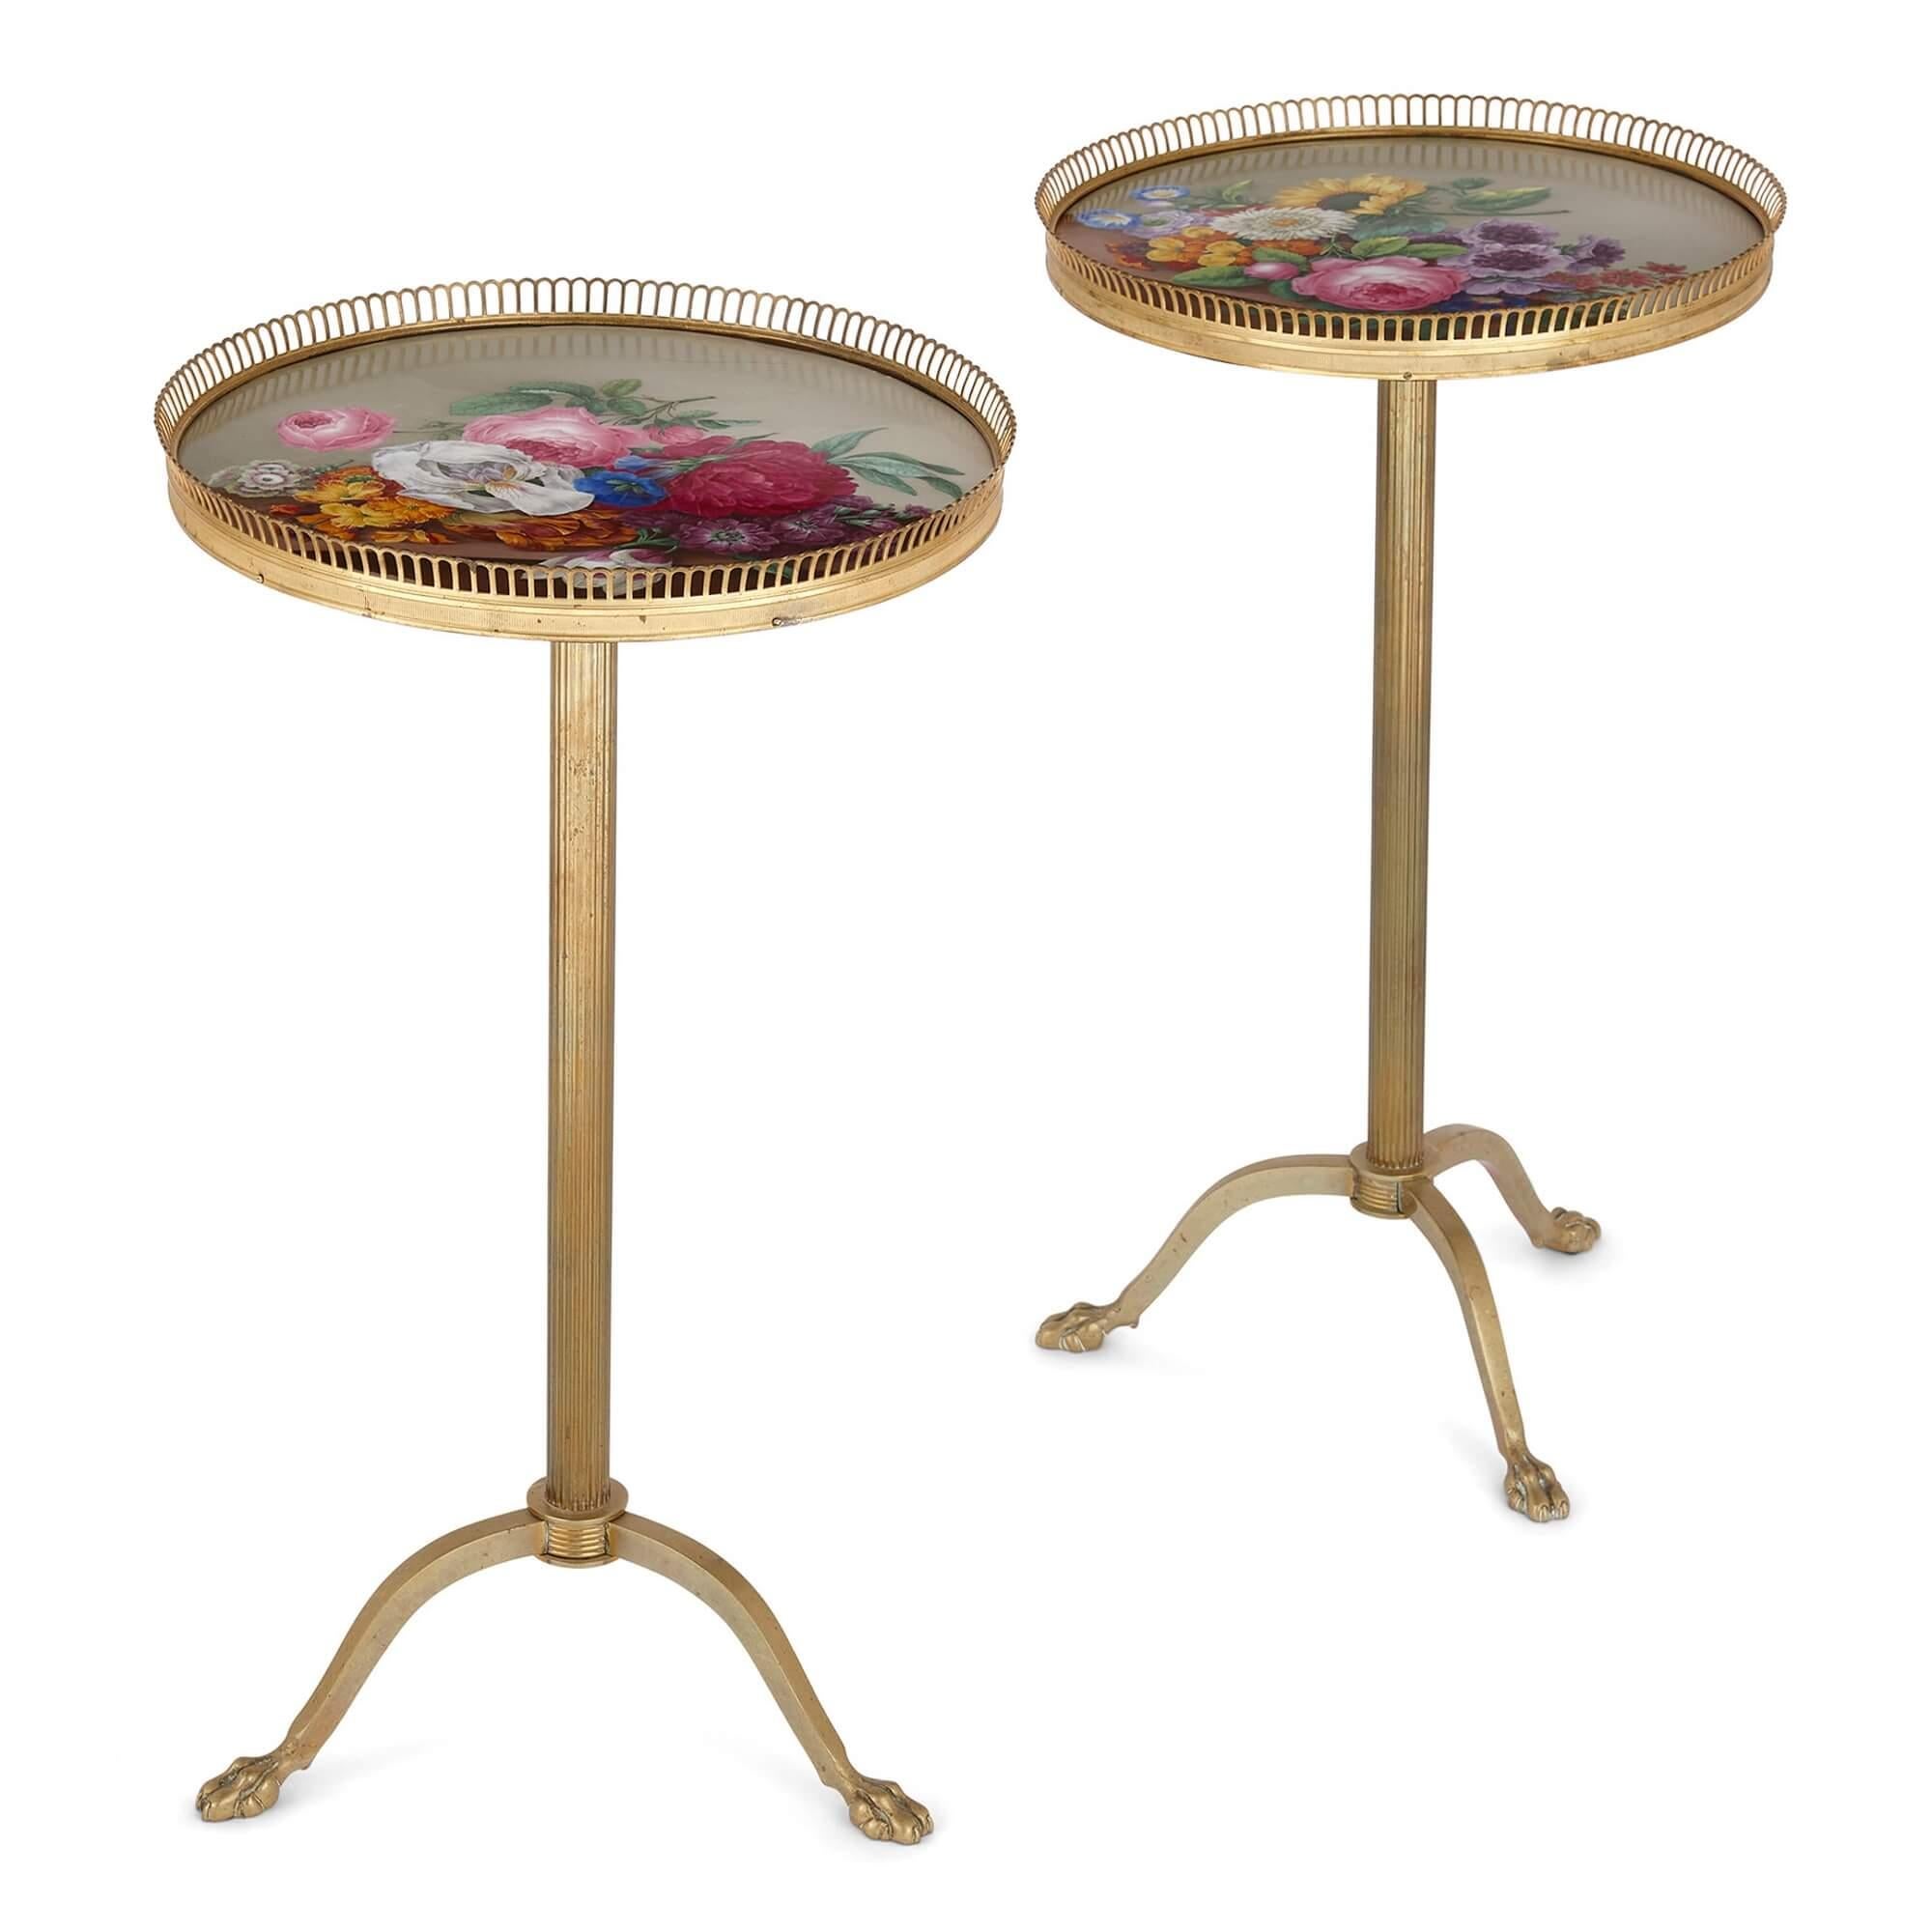 Pair of gilt metal gueridons with Meissen Porcelain tops
Porcelain: German, 19th century
Ormolu: French, 20th century
Height 60cm, diameter 34.5cm

This pair of beautiful gueridons features Meissen Porcelain tops and gilt metal frames. The